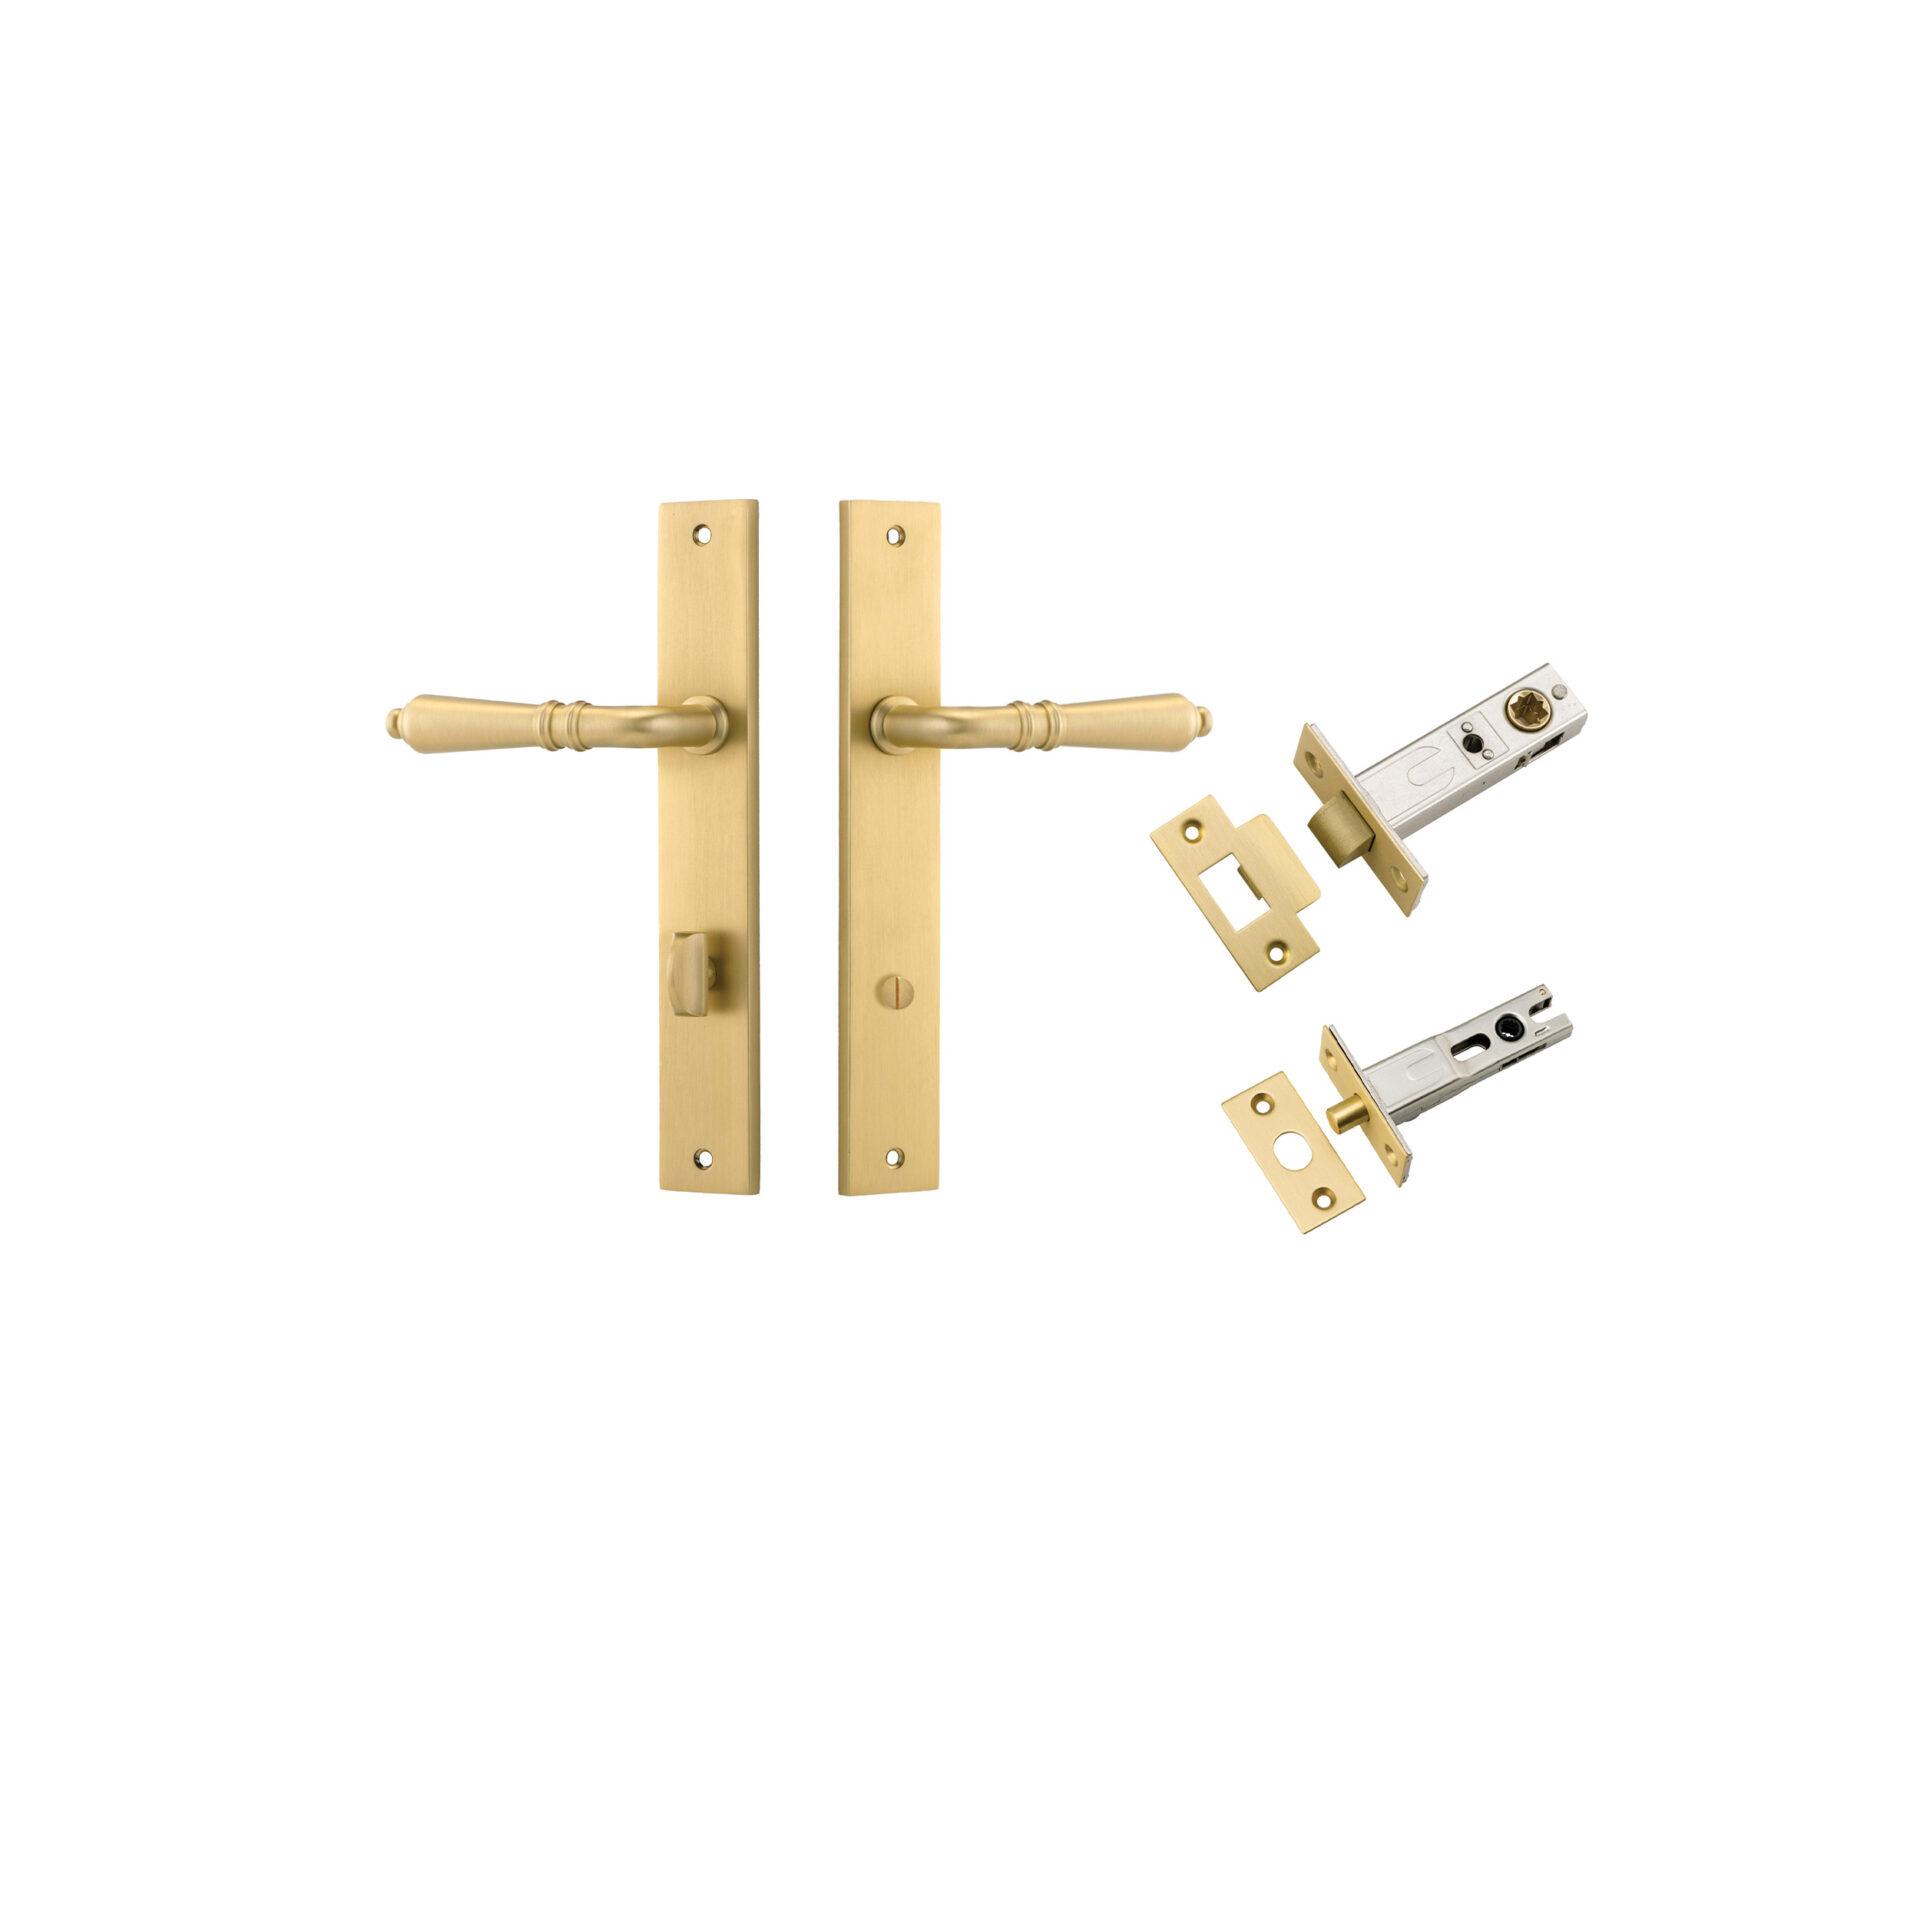 16200KPRIV60 - Sarlat Lever - Rectangular Backplate Privacy Kit with Privacy Turn - Brushed Gold PVD - Privacy